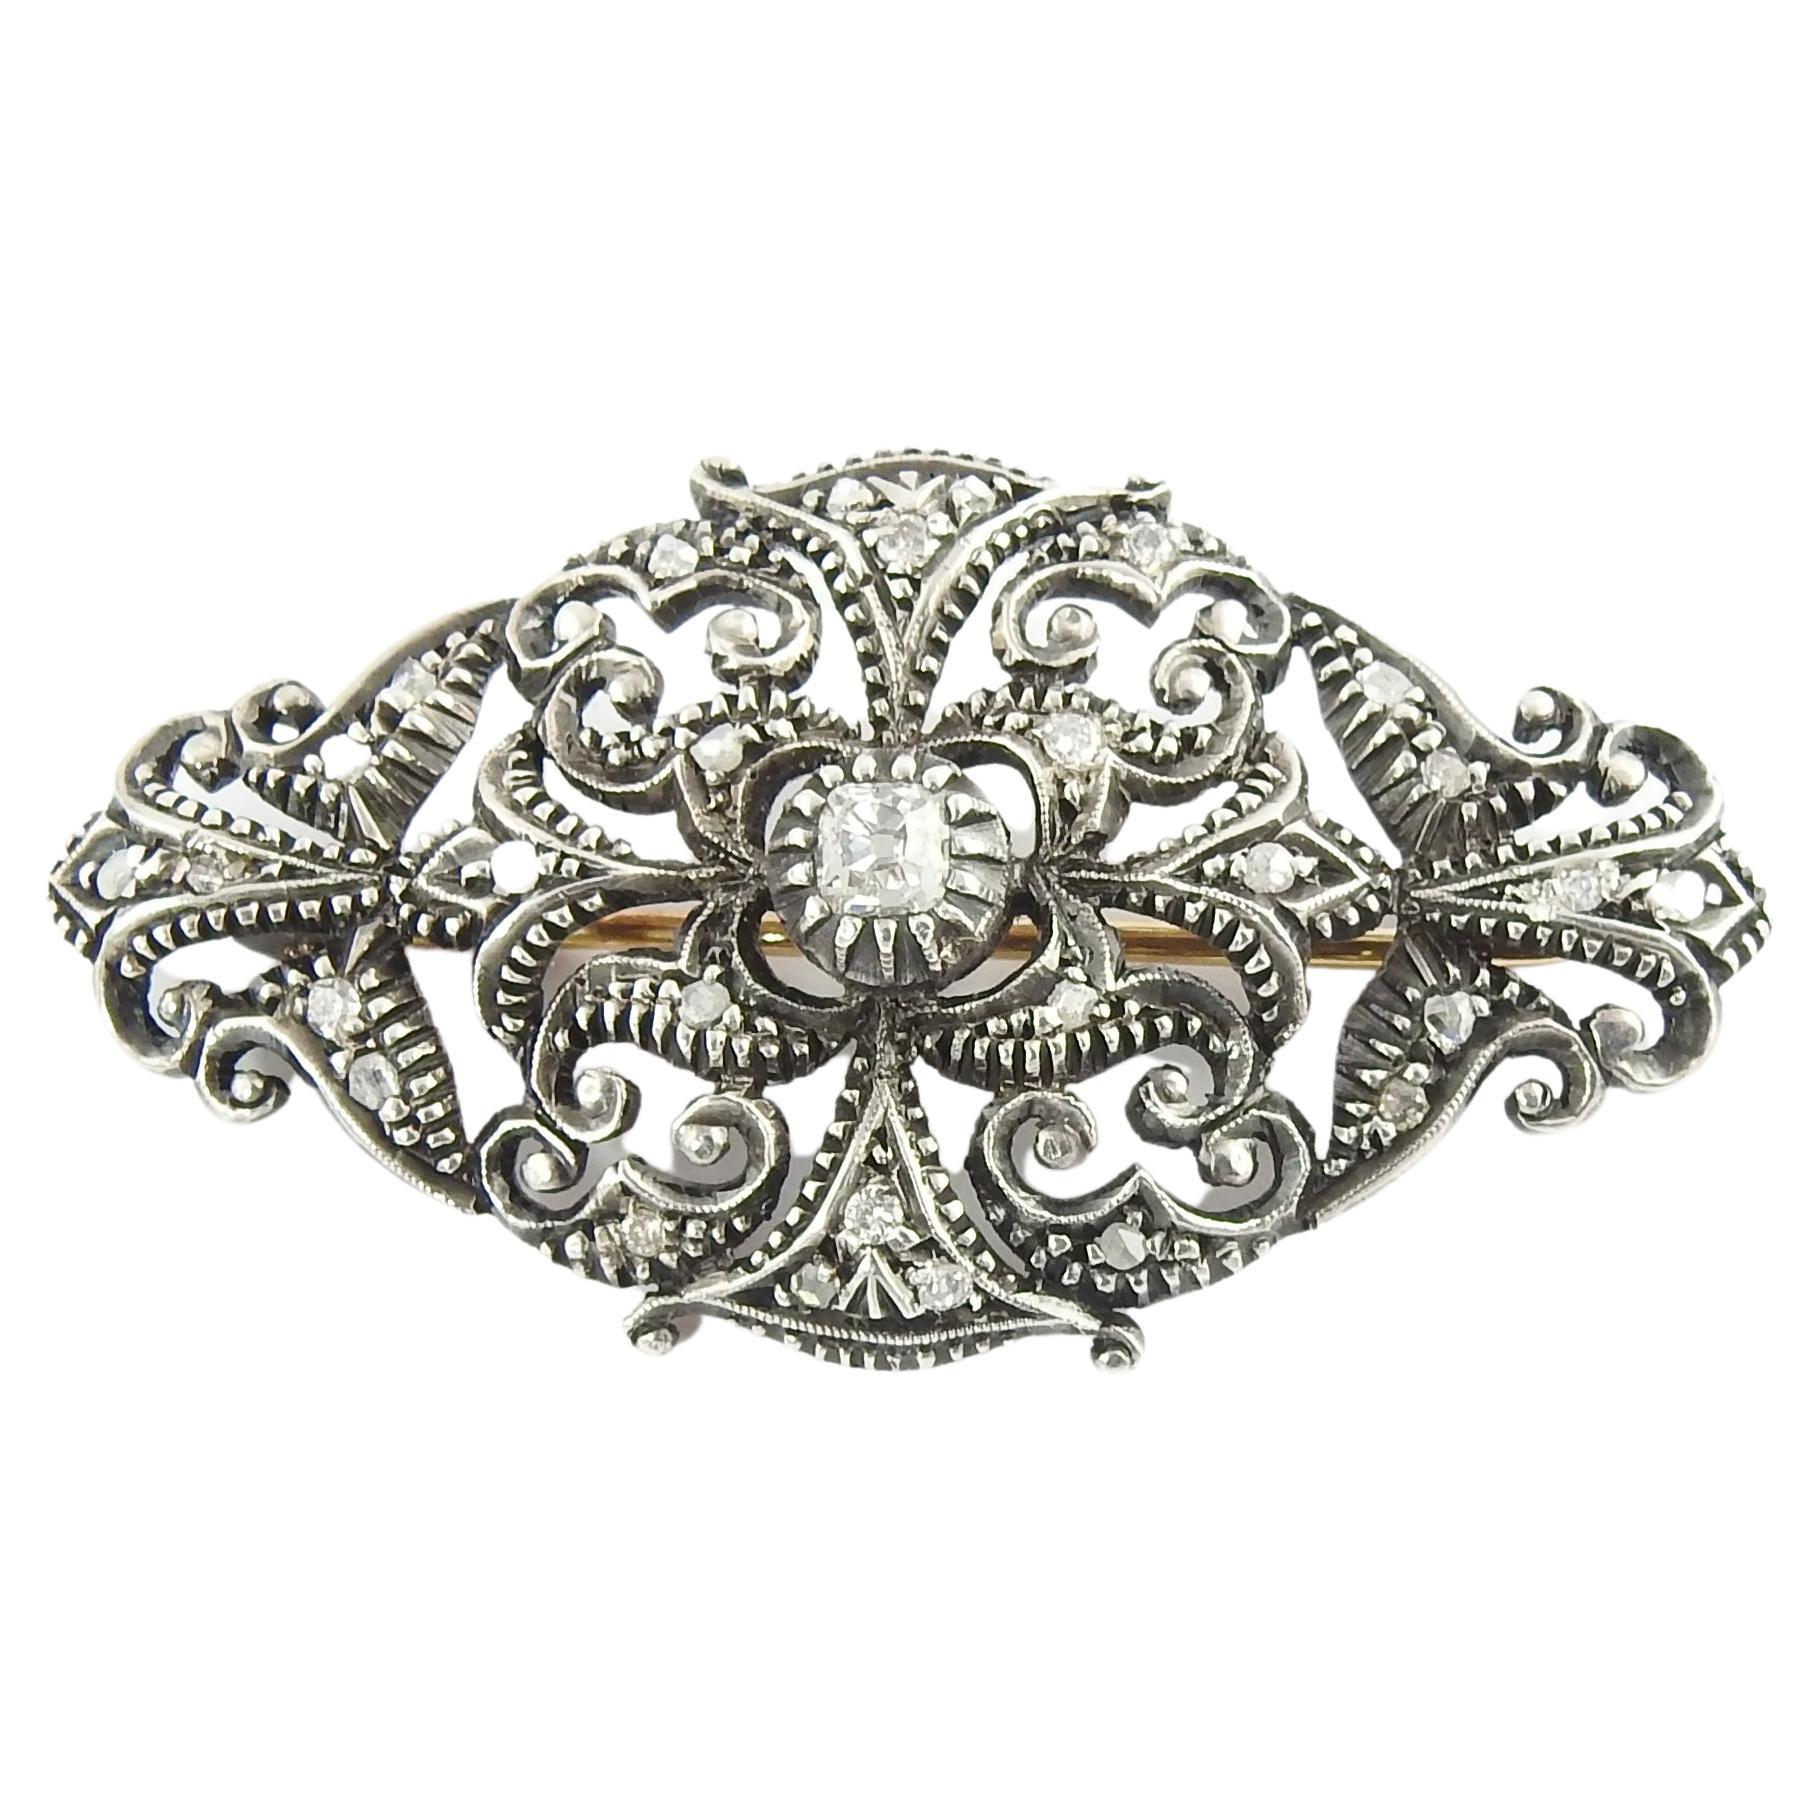 Victorian Sterling Silver and Diamond Brooch/Pin